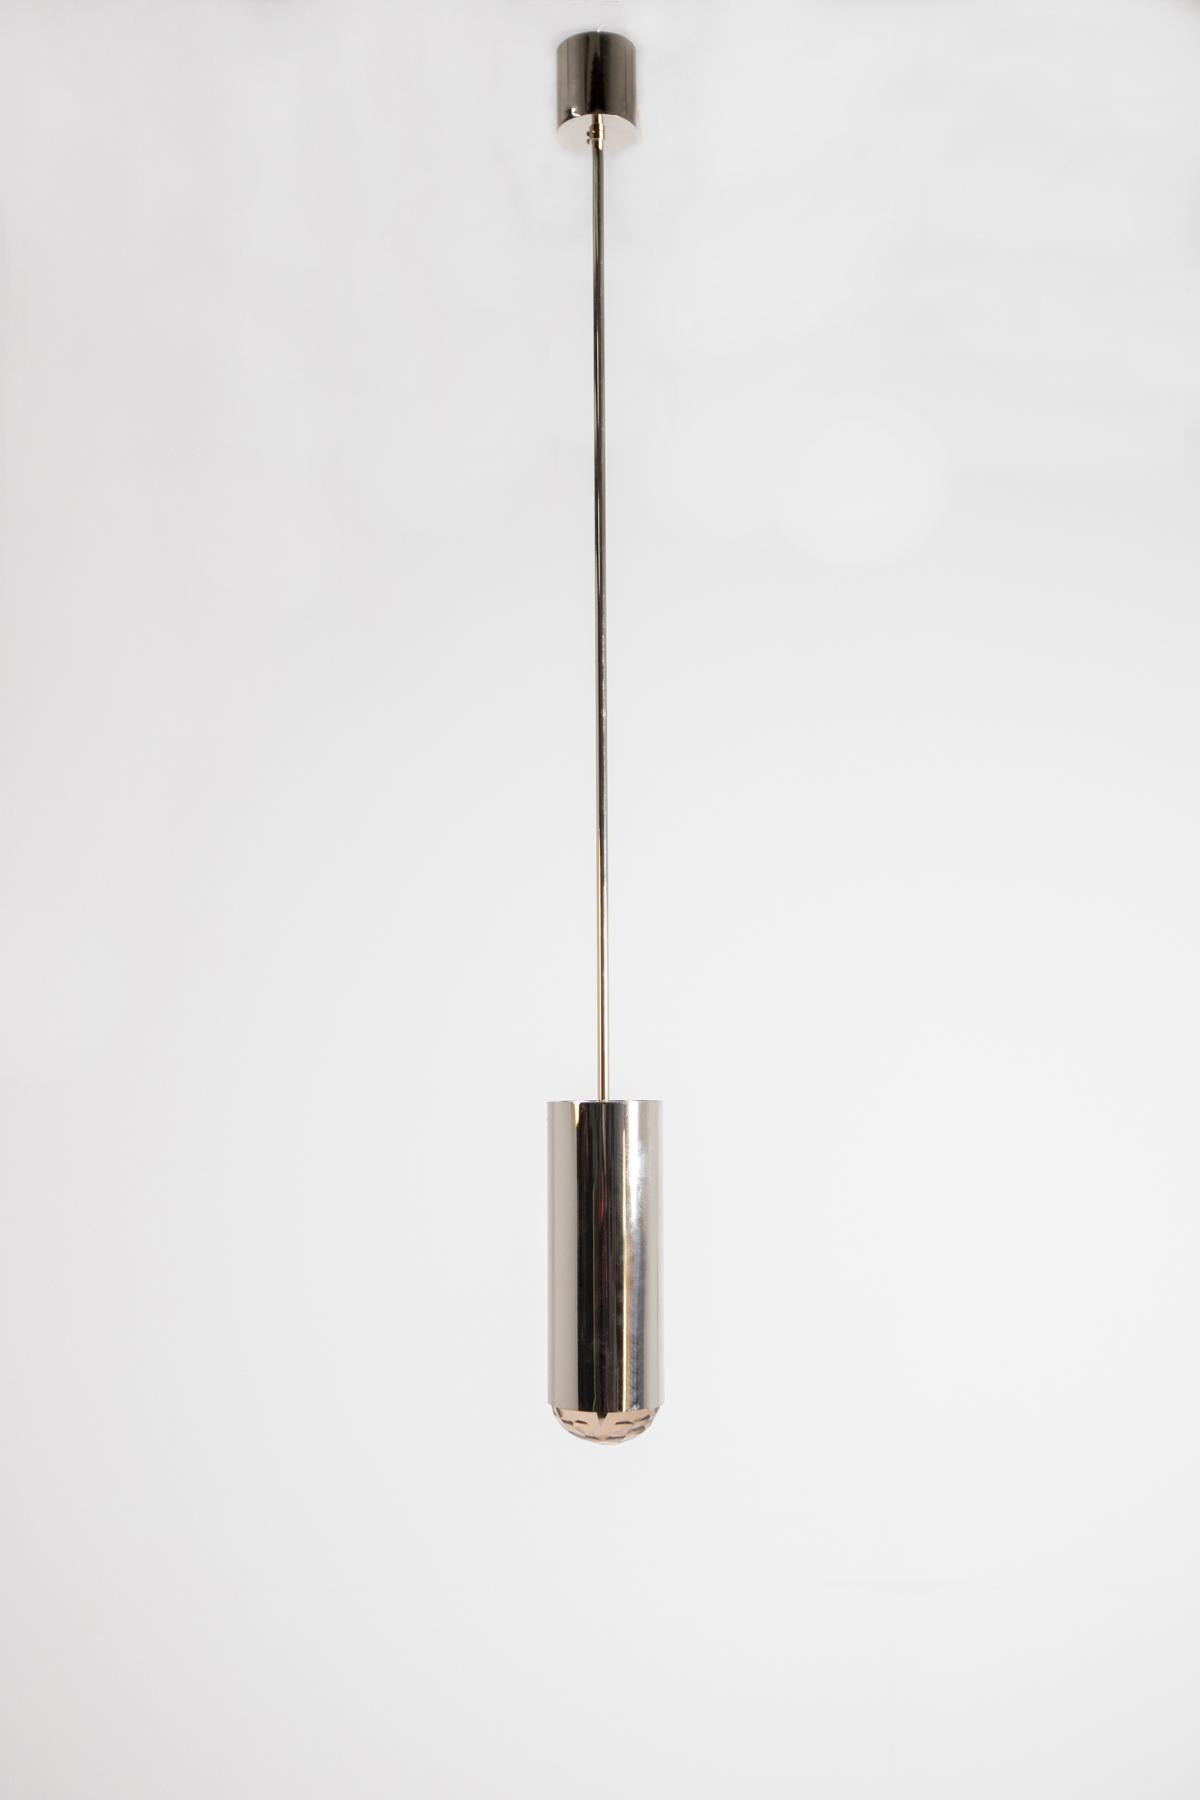 Contemporary pendant made by master glassmaker Domenico Ghirò from 2020. Its refined and innate elegance given by its sobriety of form, gives the environment circumstances elegance and sophistication. Ghirò pendant is made of nickel-plated brass